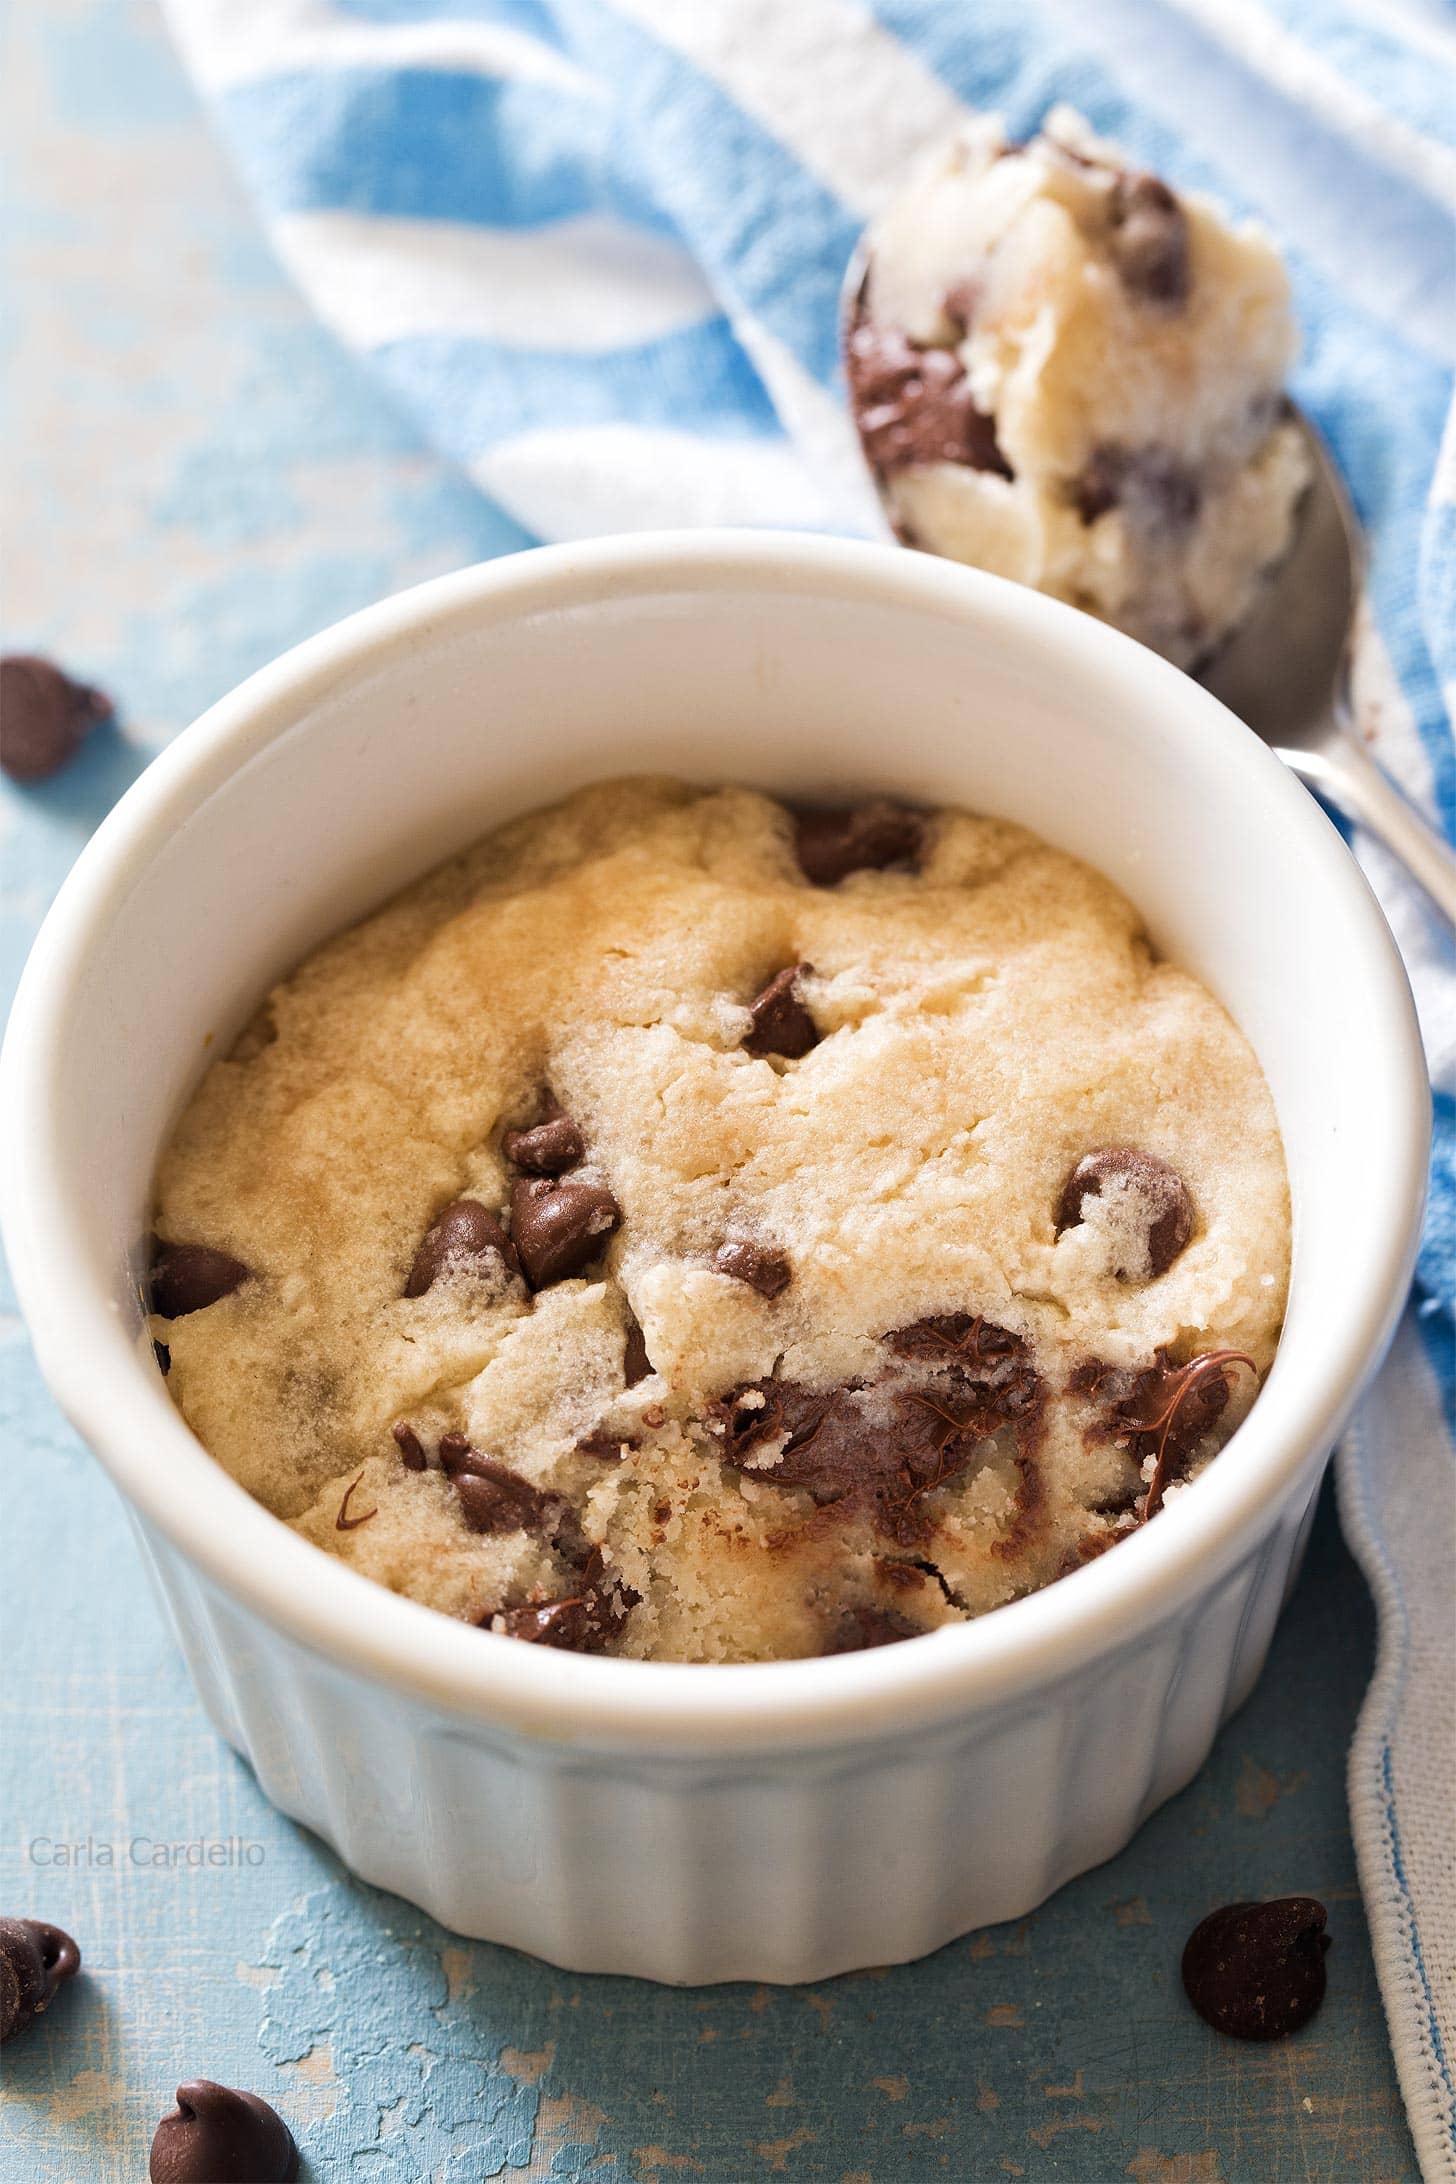 Microwave chocolate chip cookie in a ramekin with bite taken out